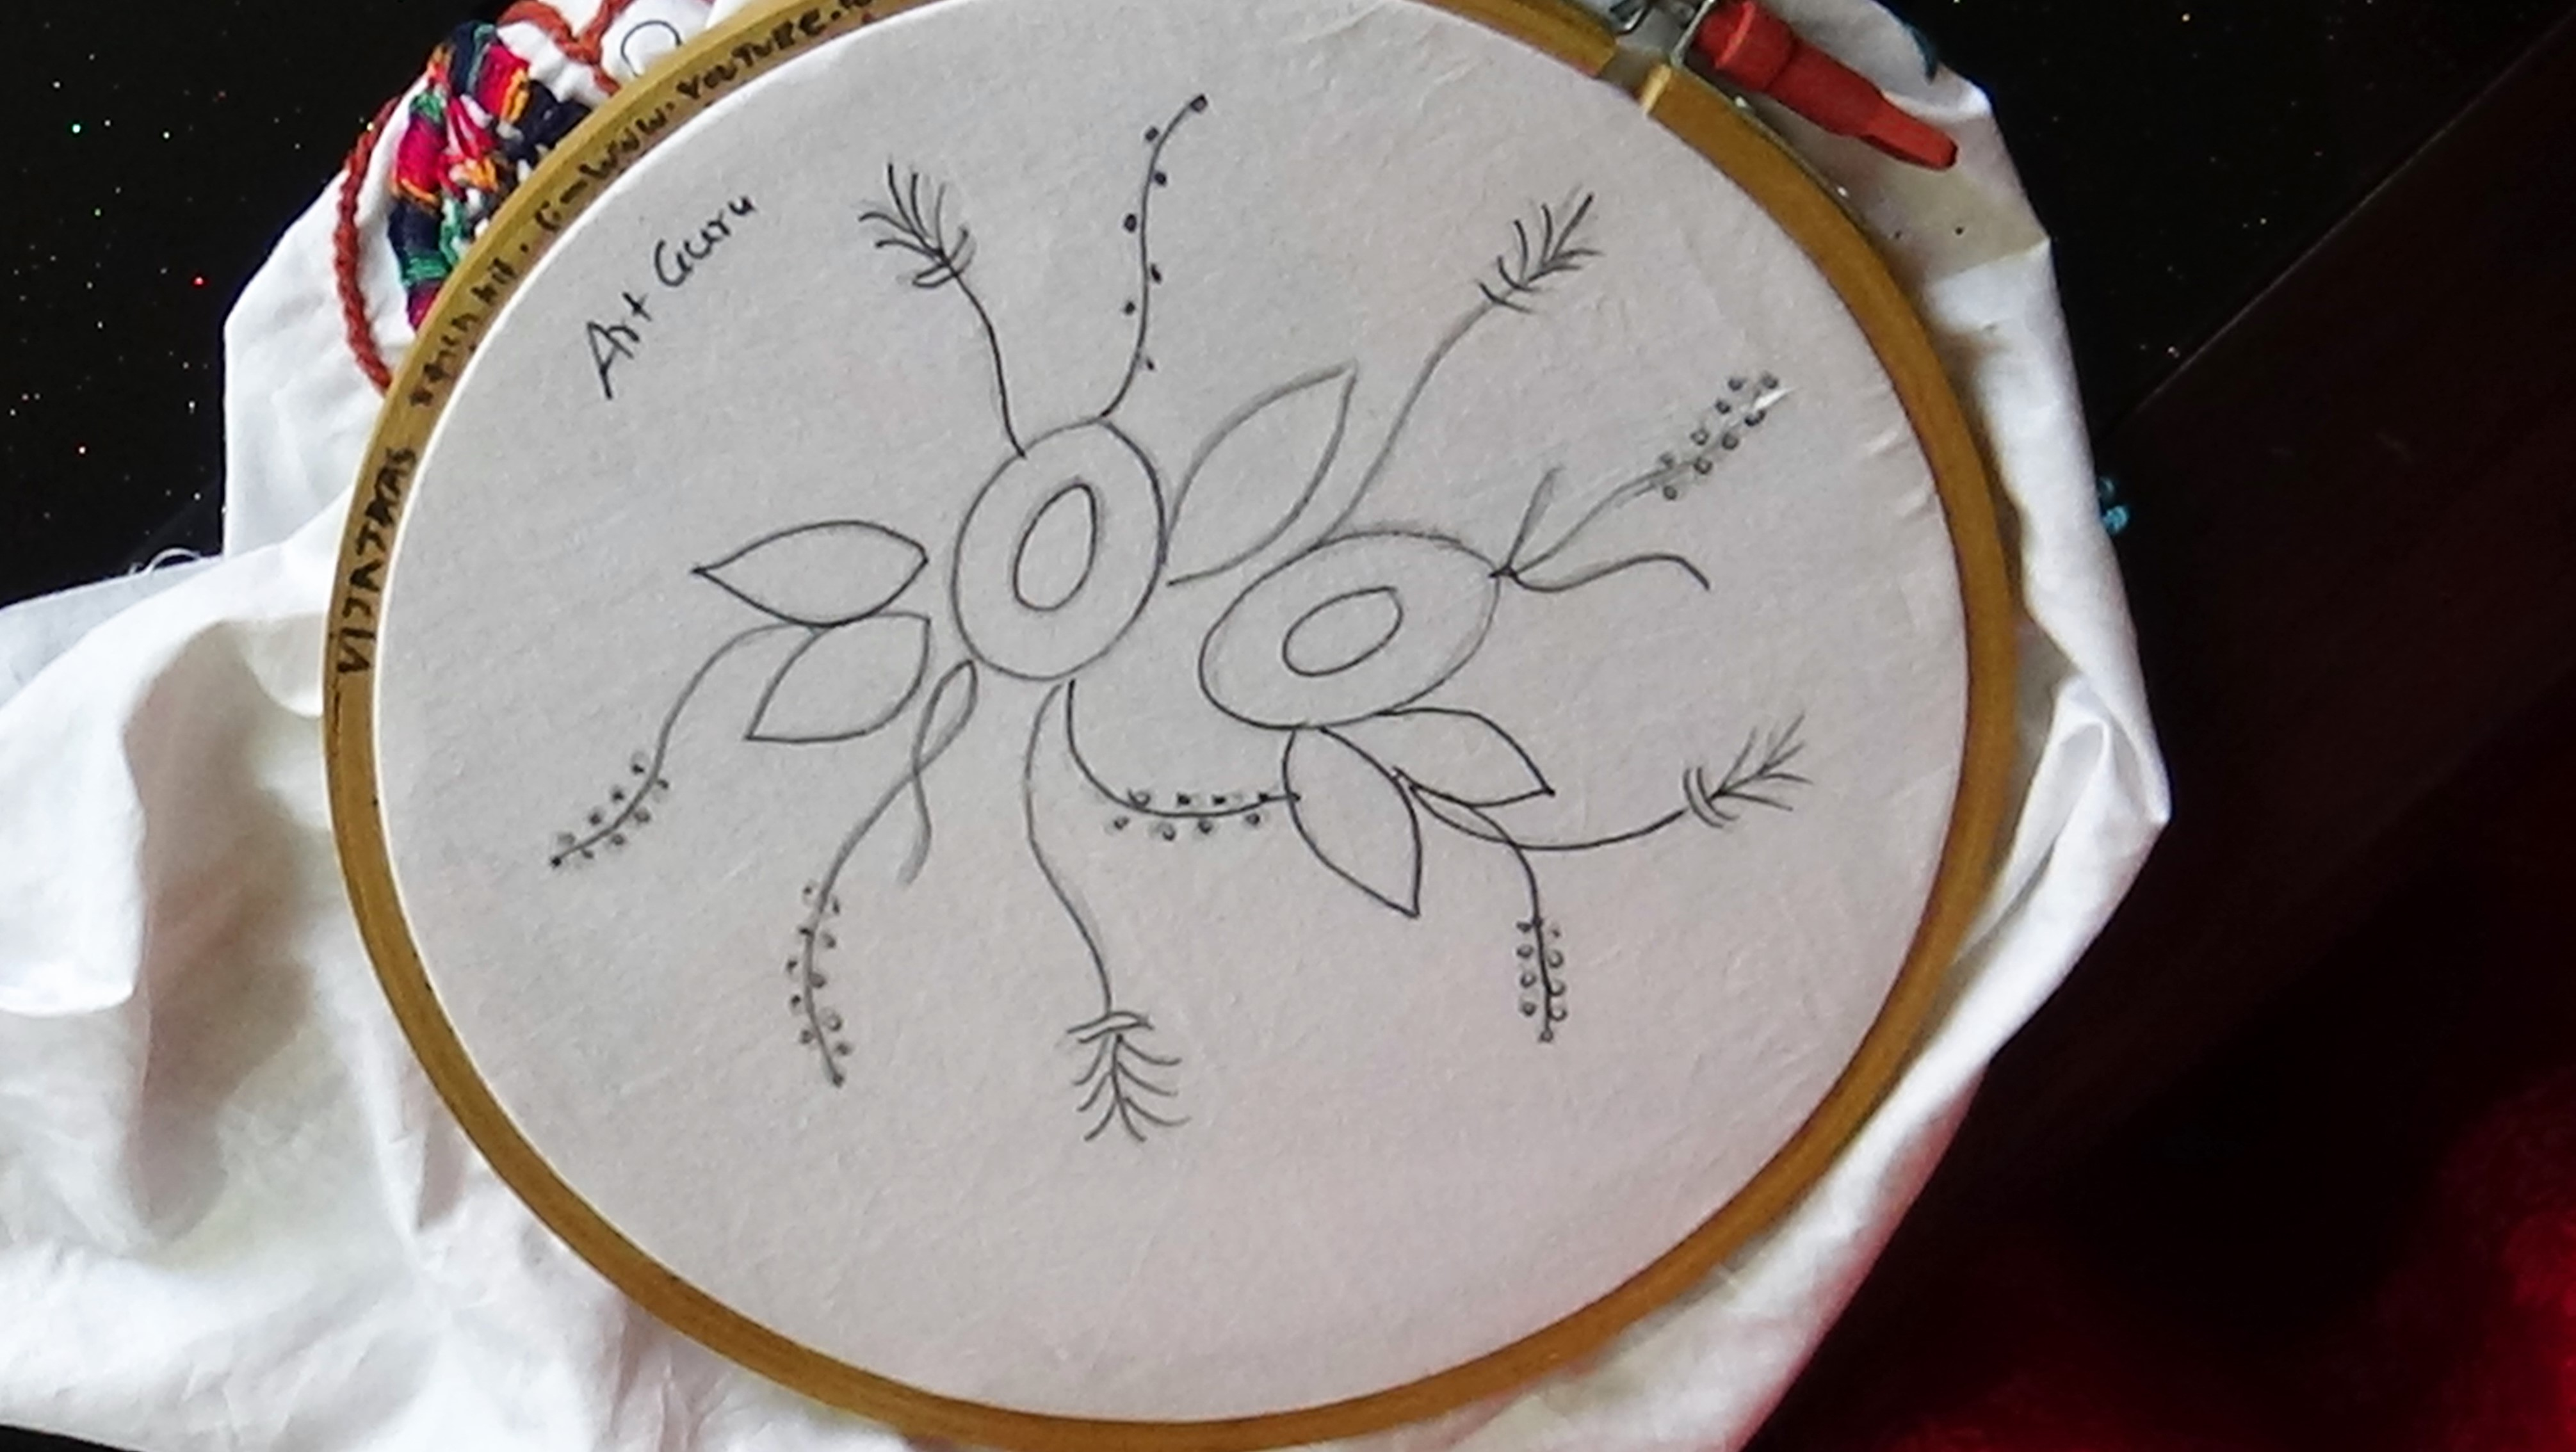 How To Make Embroidery Patterns Embroidery Designs Drawing At Paintingvalley Explore